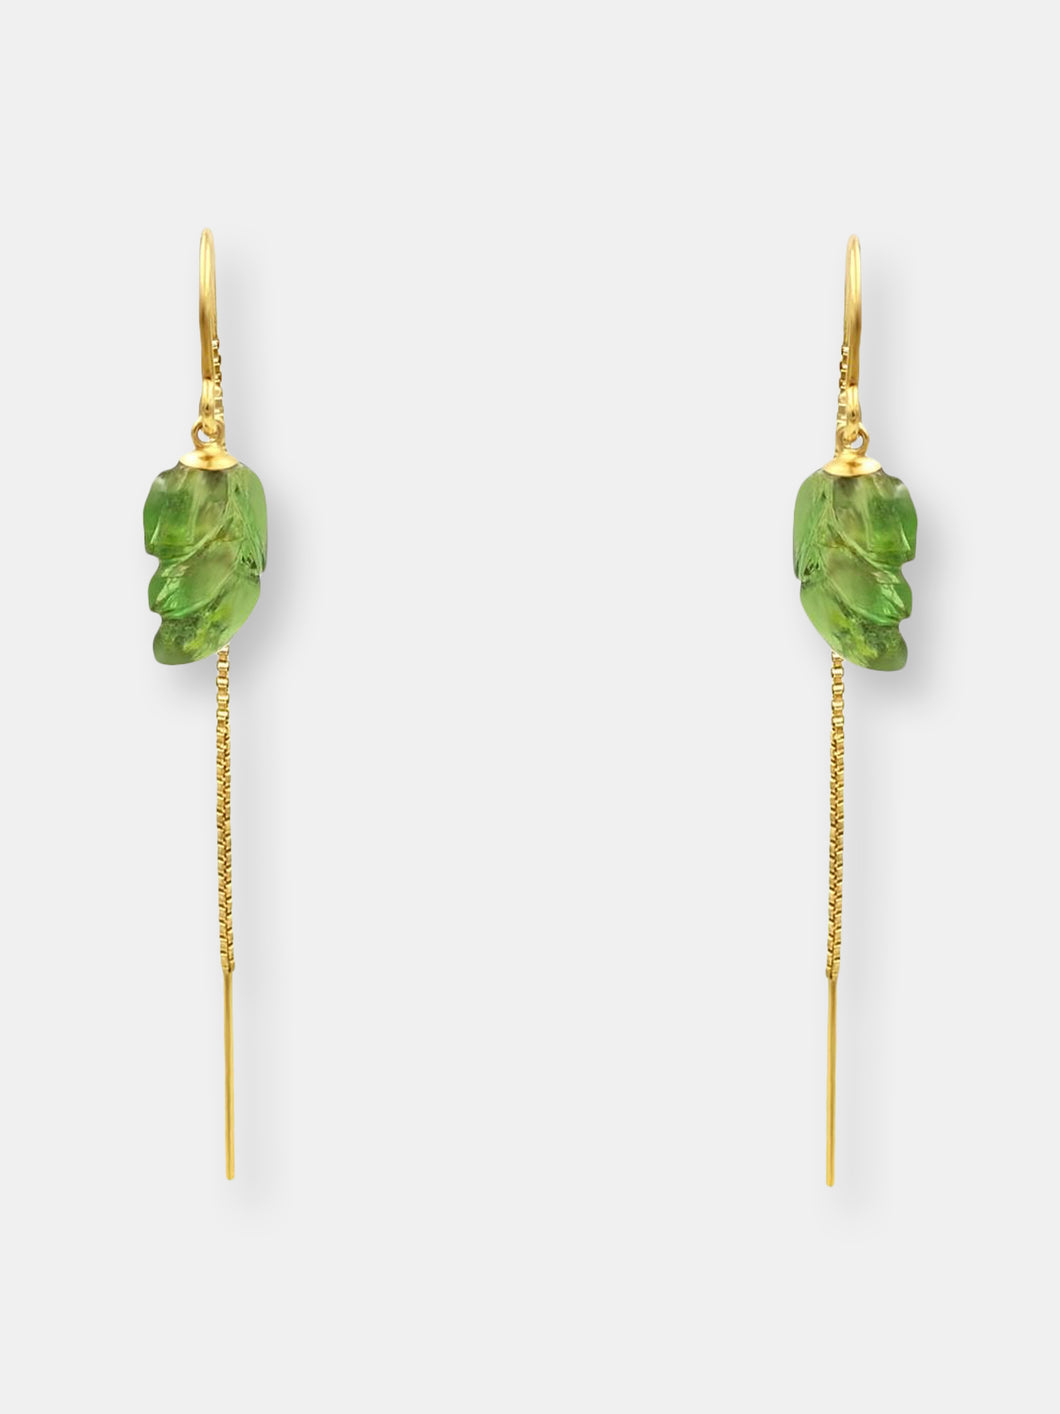 Carved Green Tourmaline Earrings - One Of A Kind